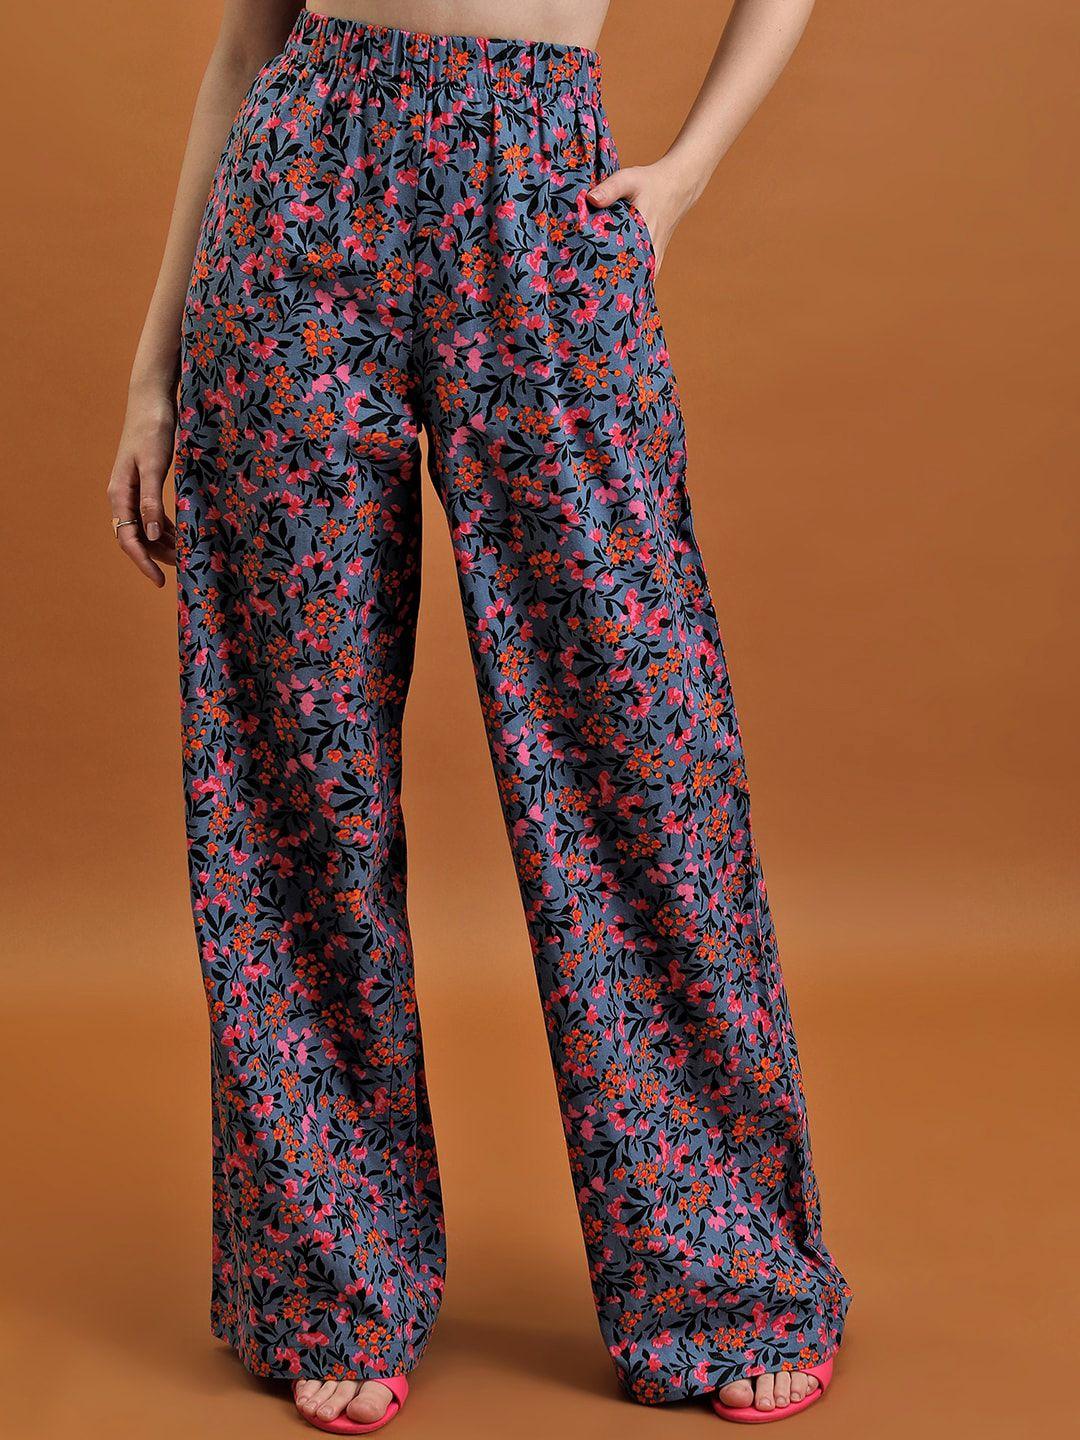 tokyo talkies women blue floral printed high-rise cotton trousers